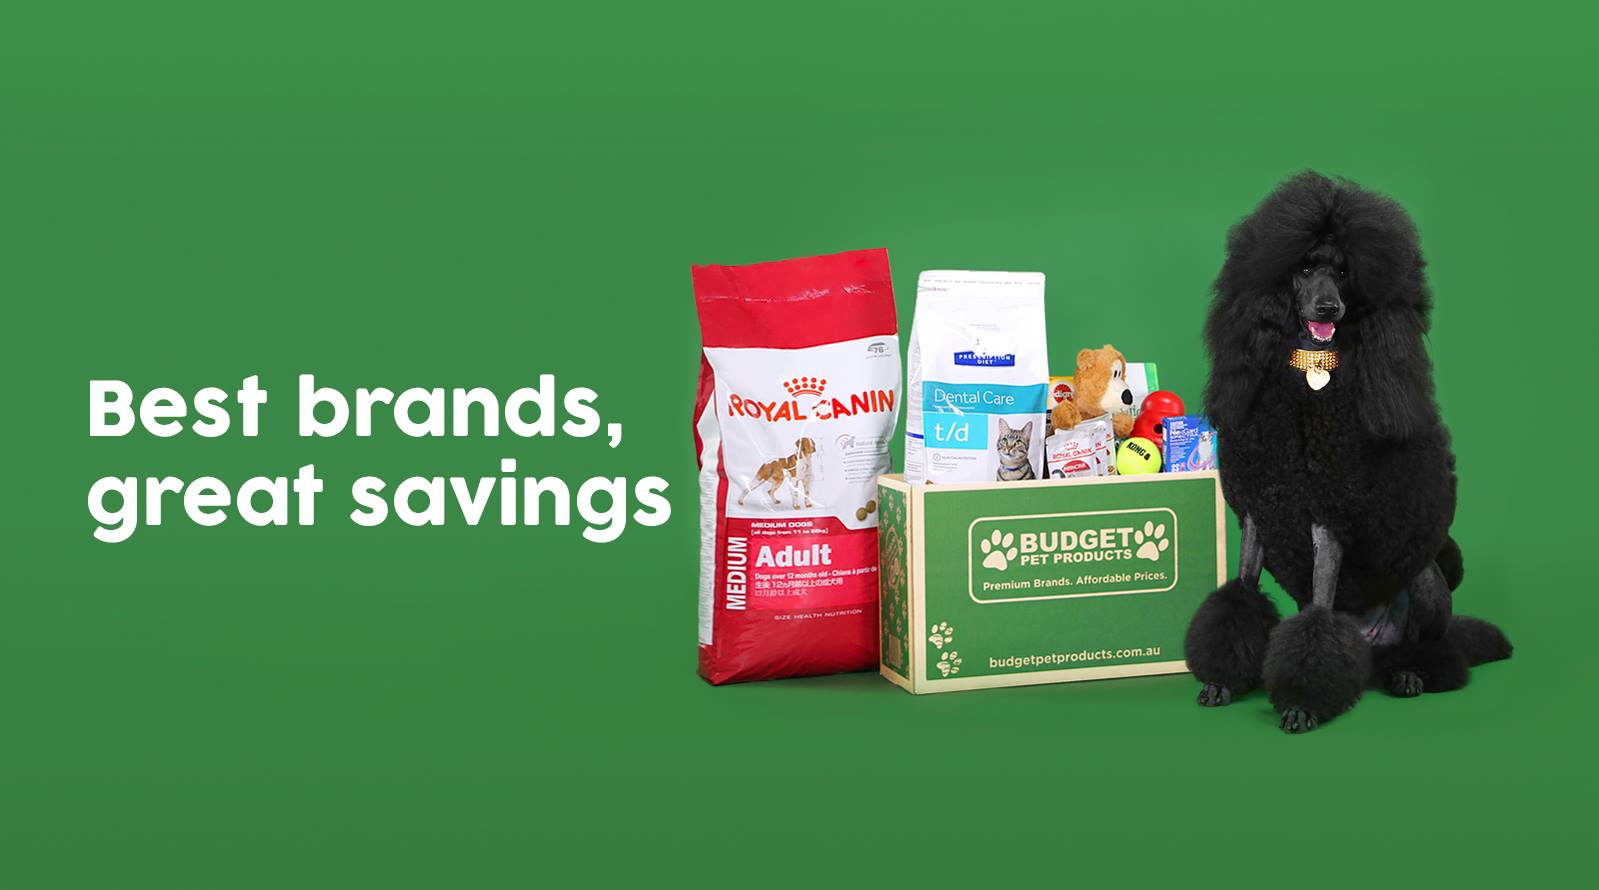 Find All Current Promotions from Budget Pet Products in one page!